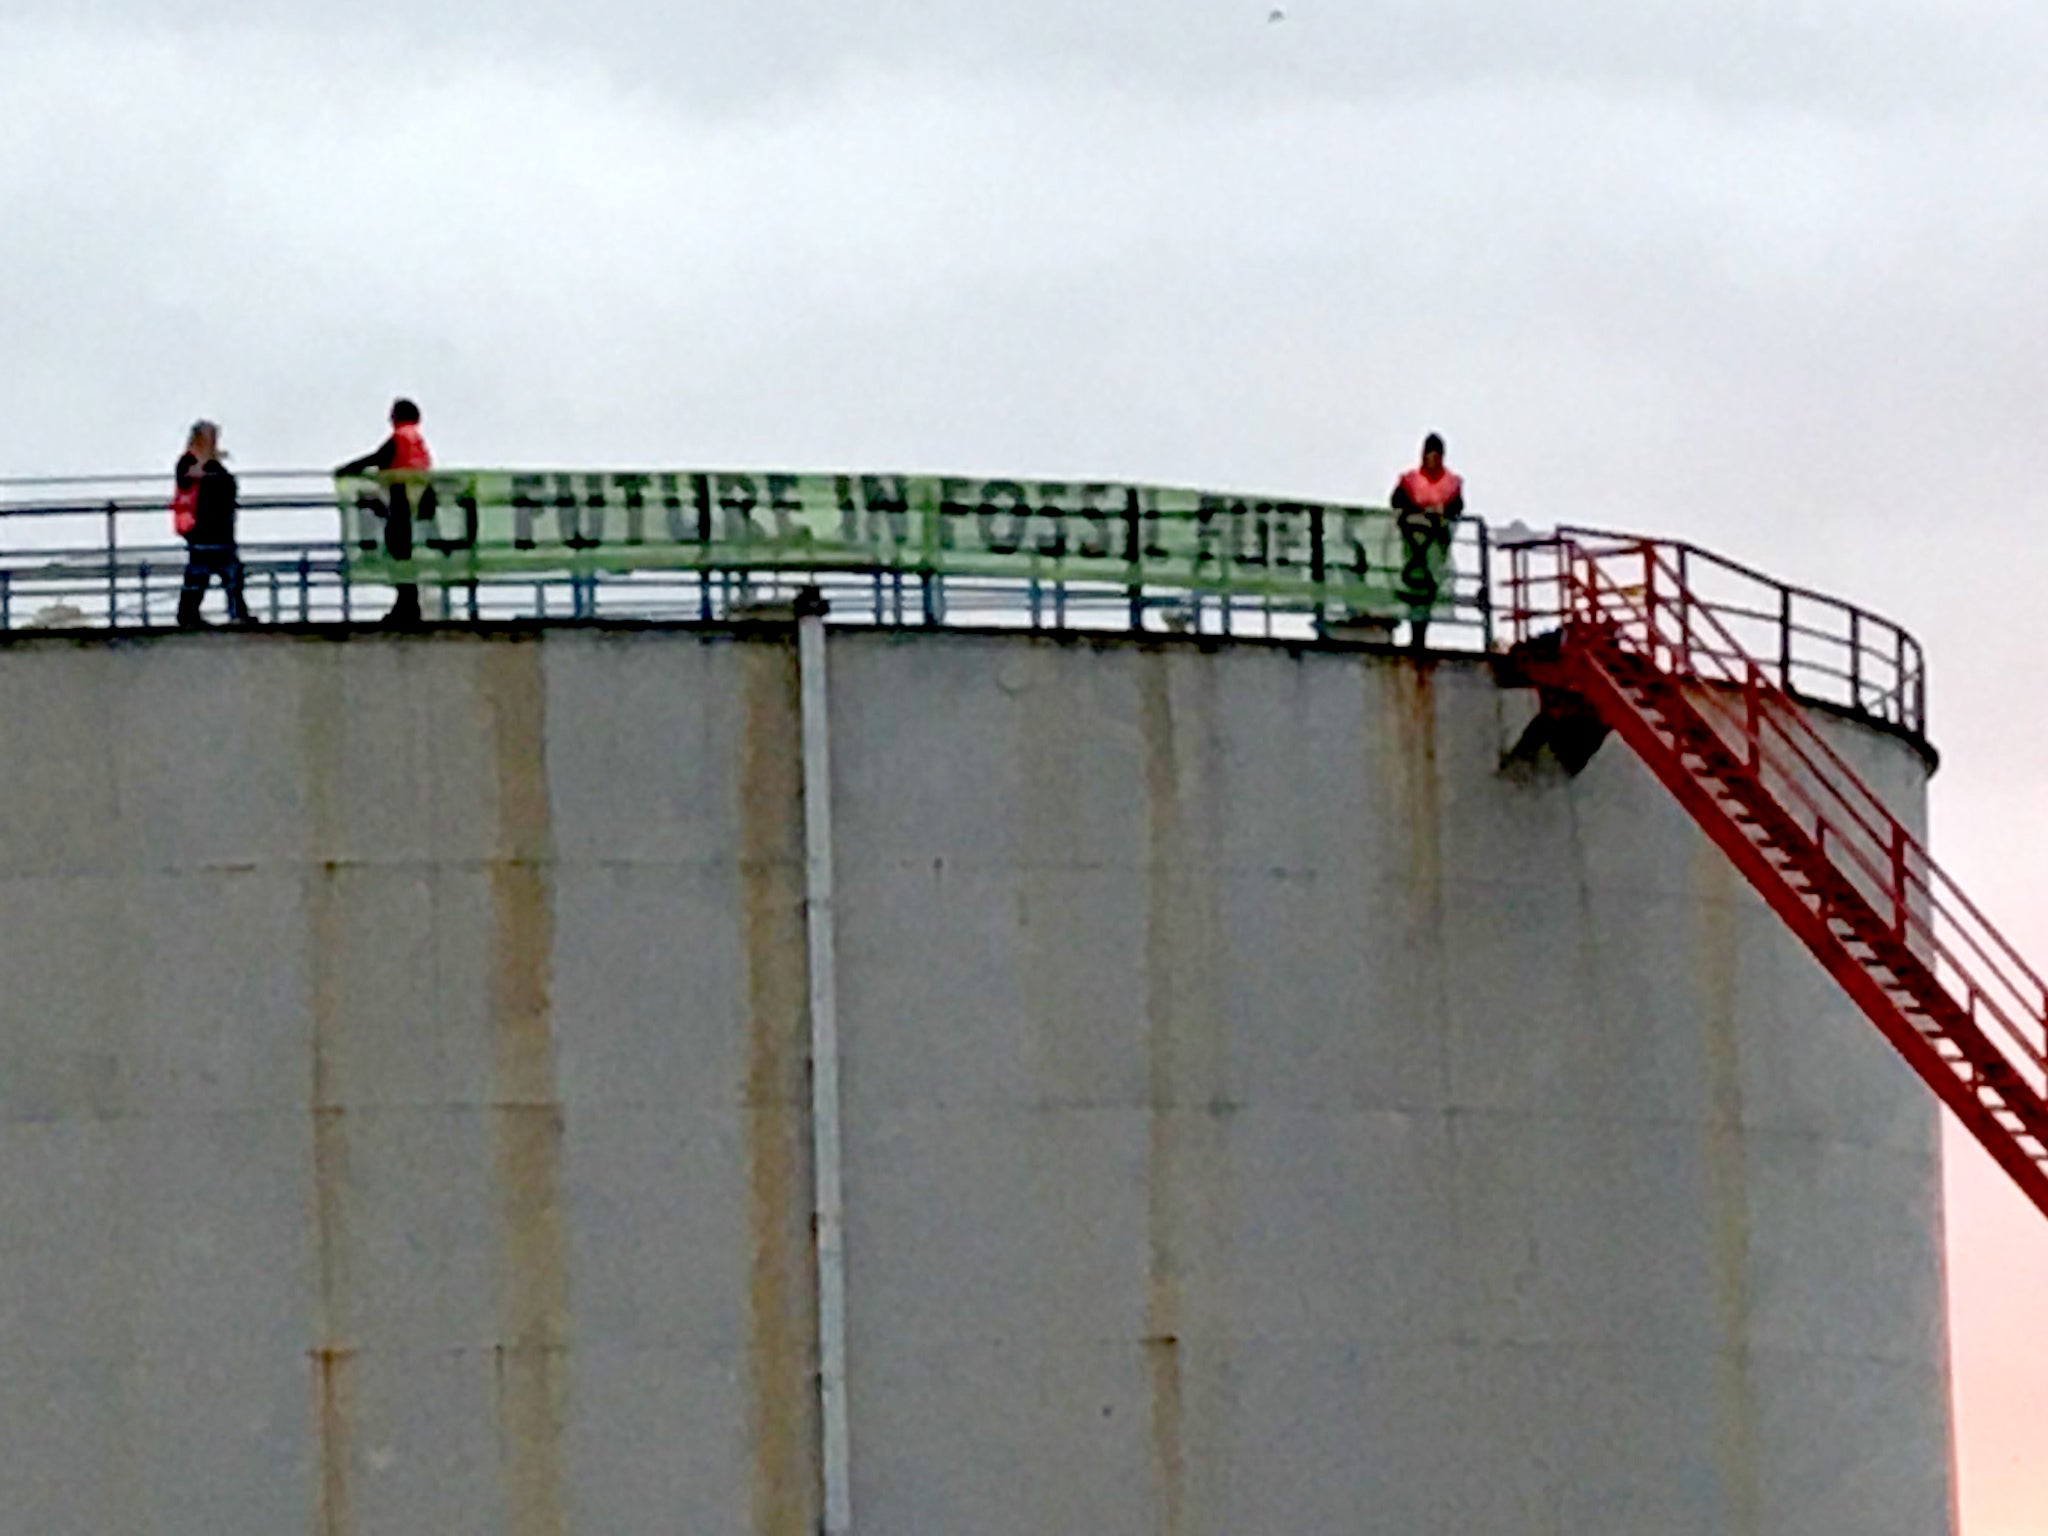 XR protestors climbed a silo at the Fawley oil refinery in Hampshire on Thursday